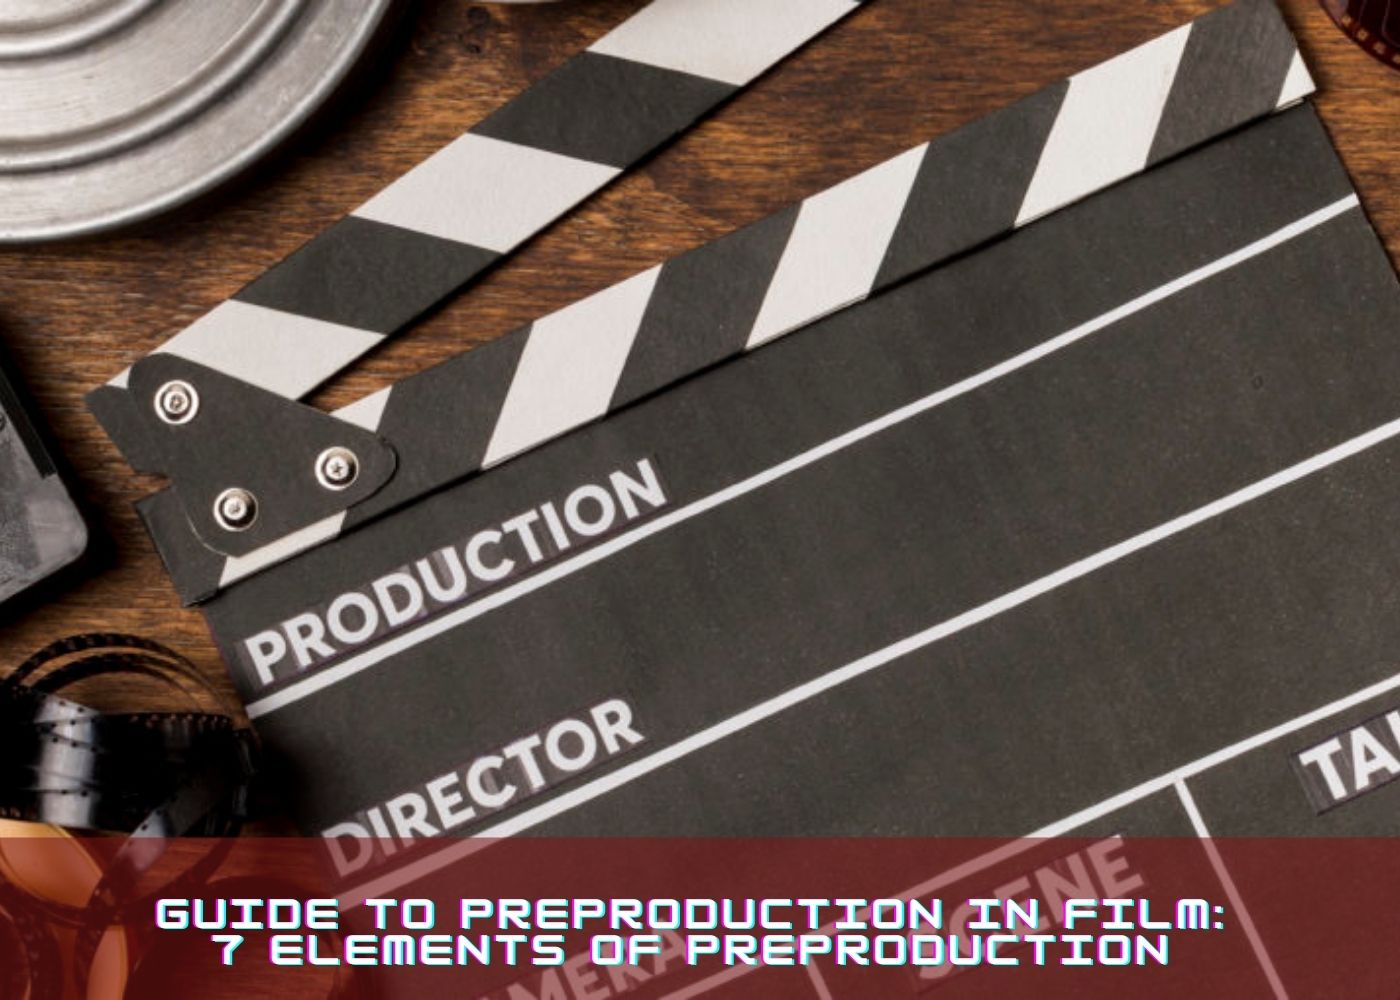 Guide to Preproduction in Film: 7 Elements of Preproduction 